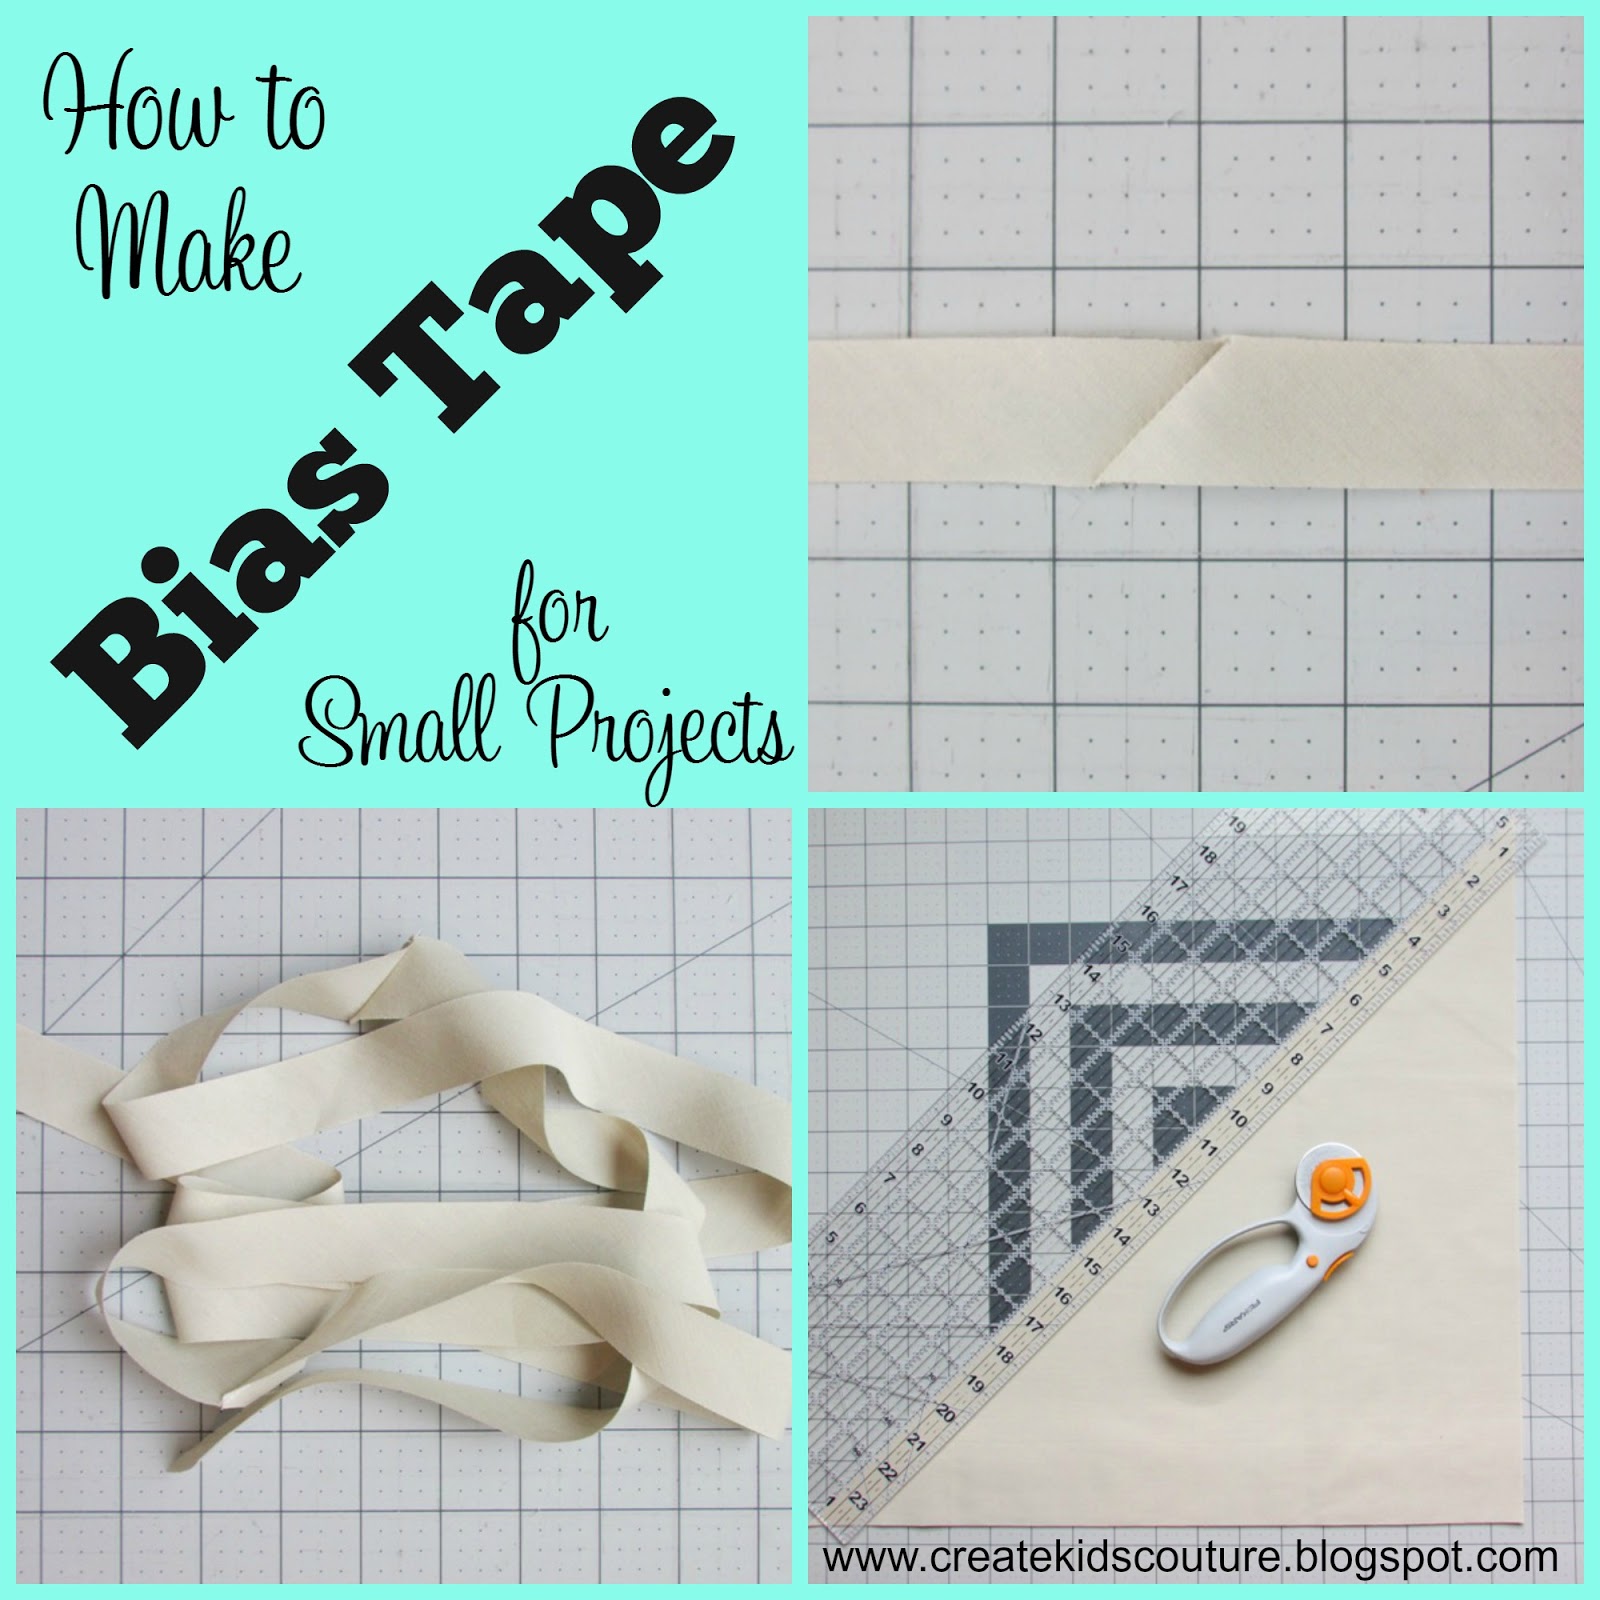 Create Kids Couture: How to Make Bias Tape for Small Projects